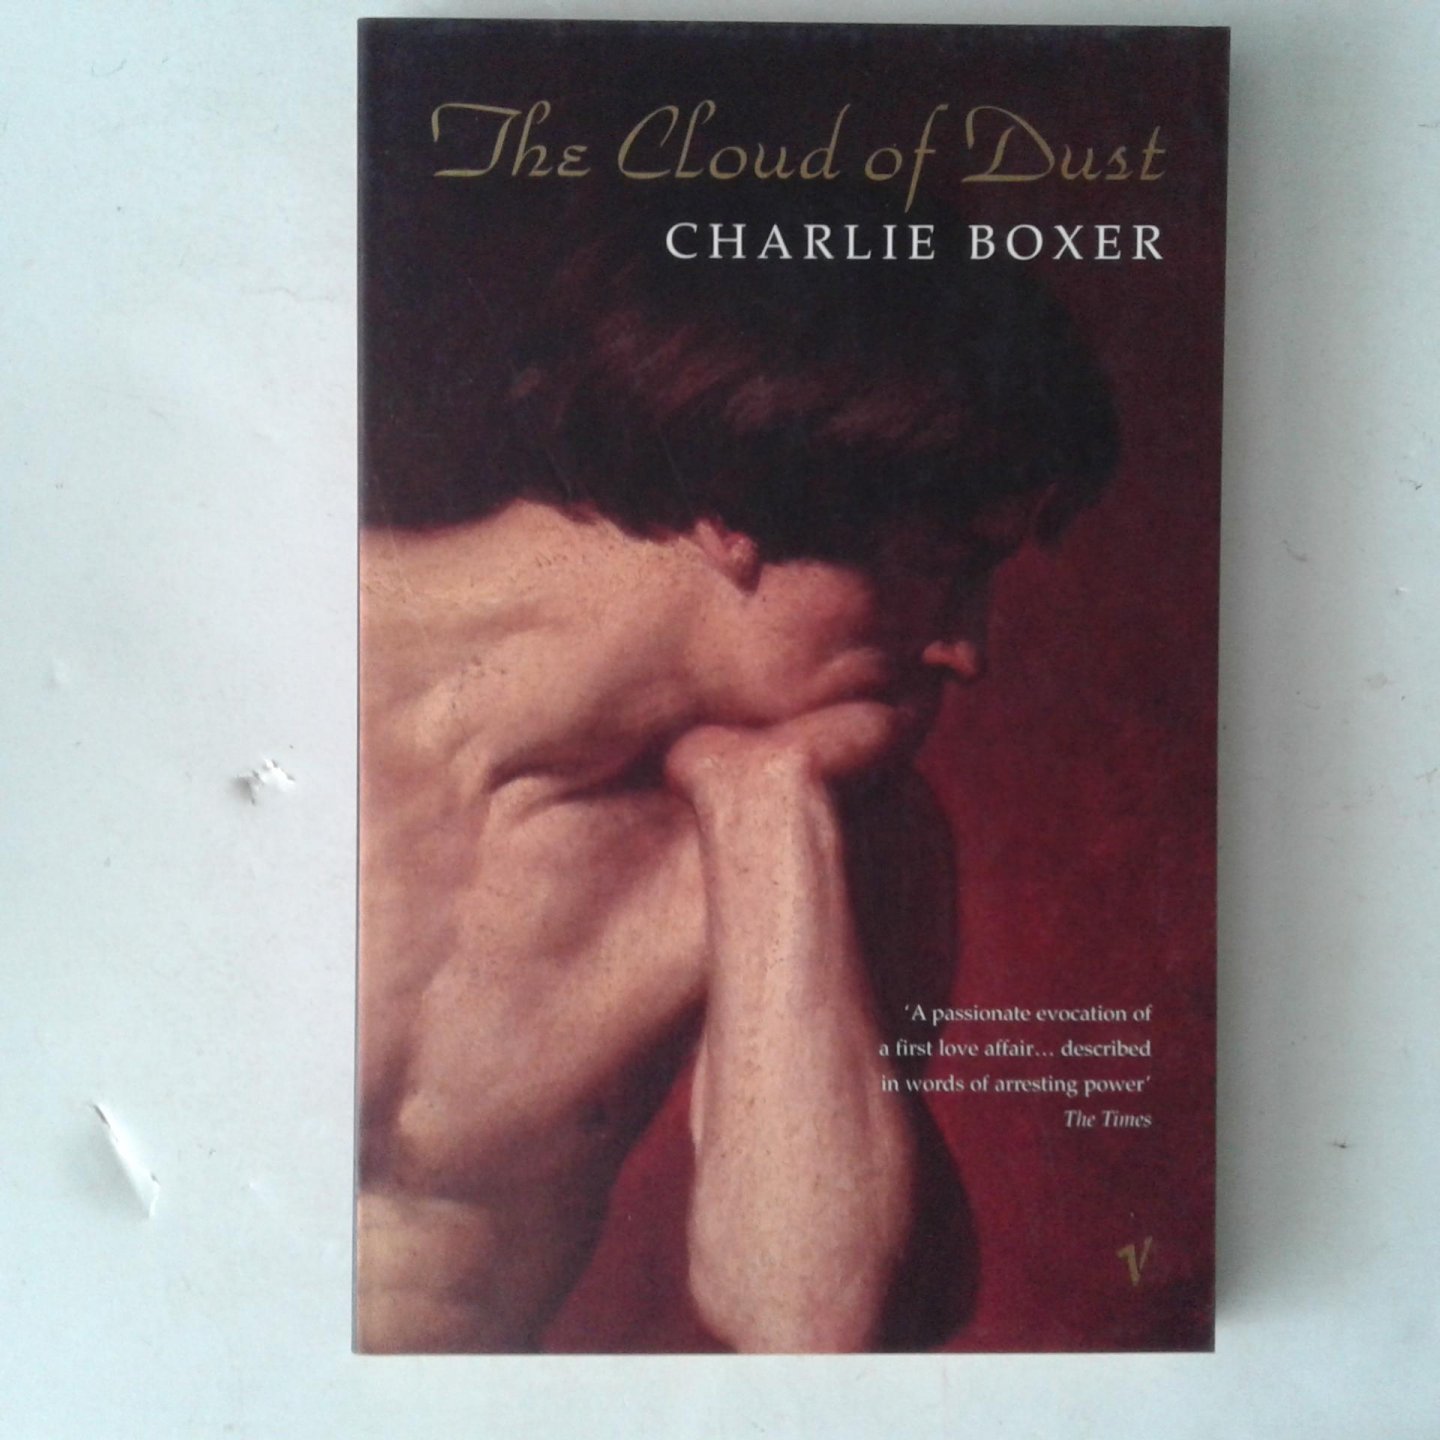 Boxer, Charlie - The Cloud of Dust